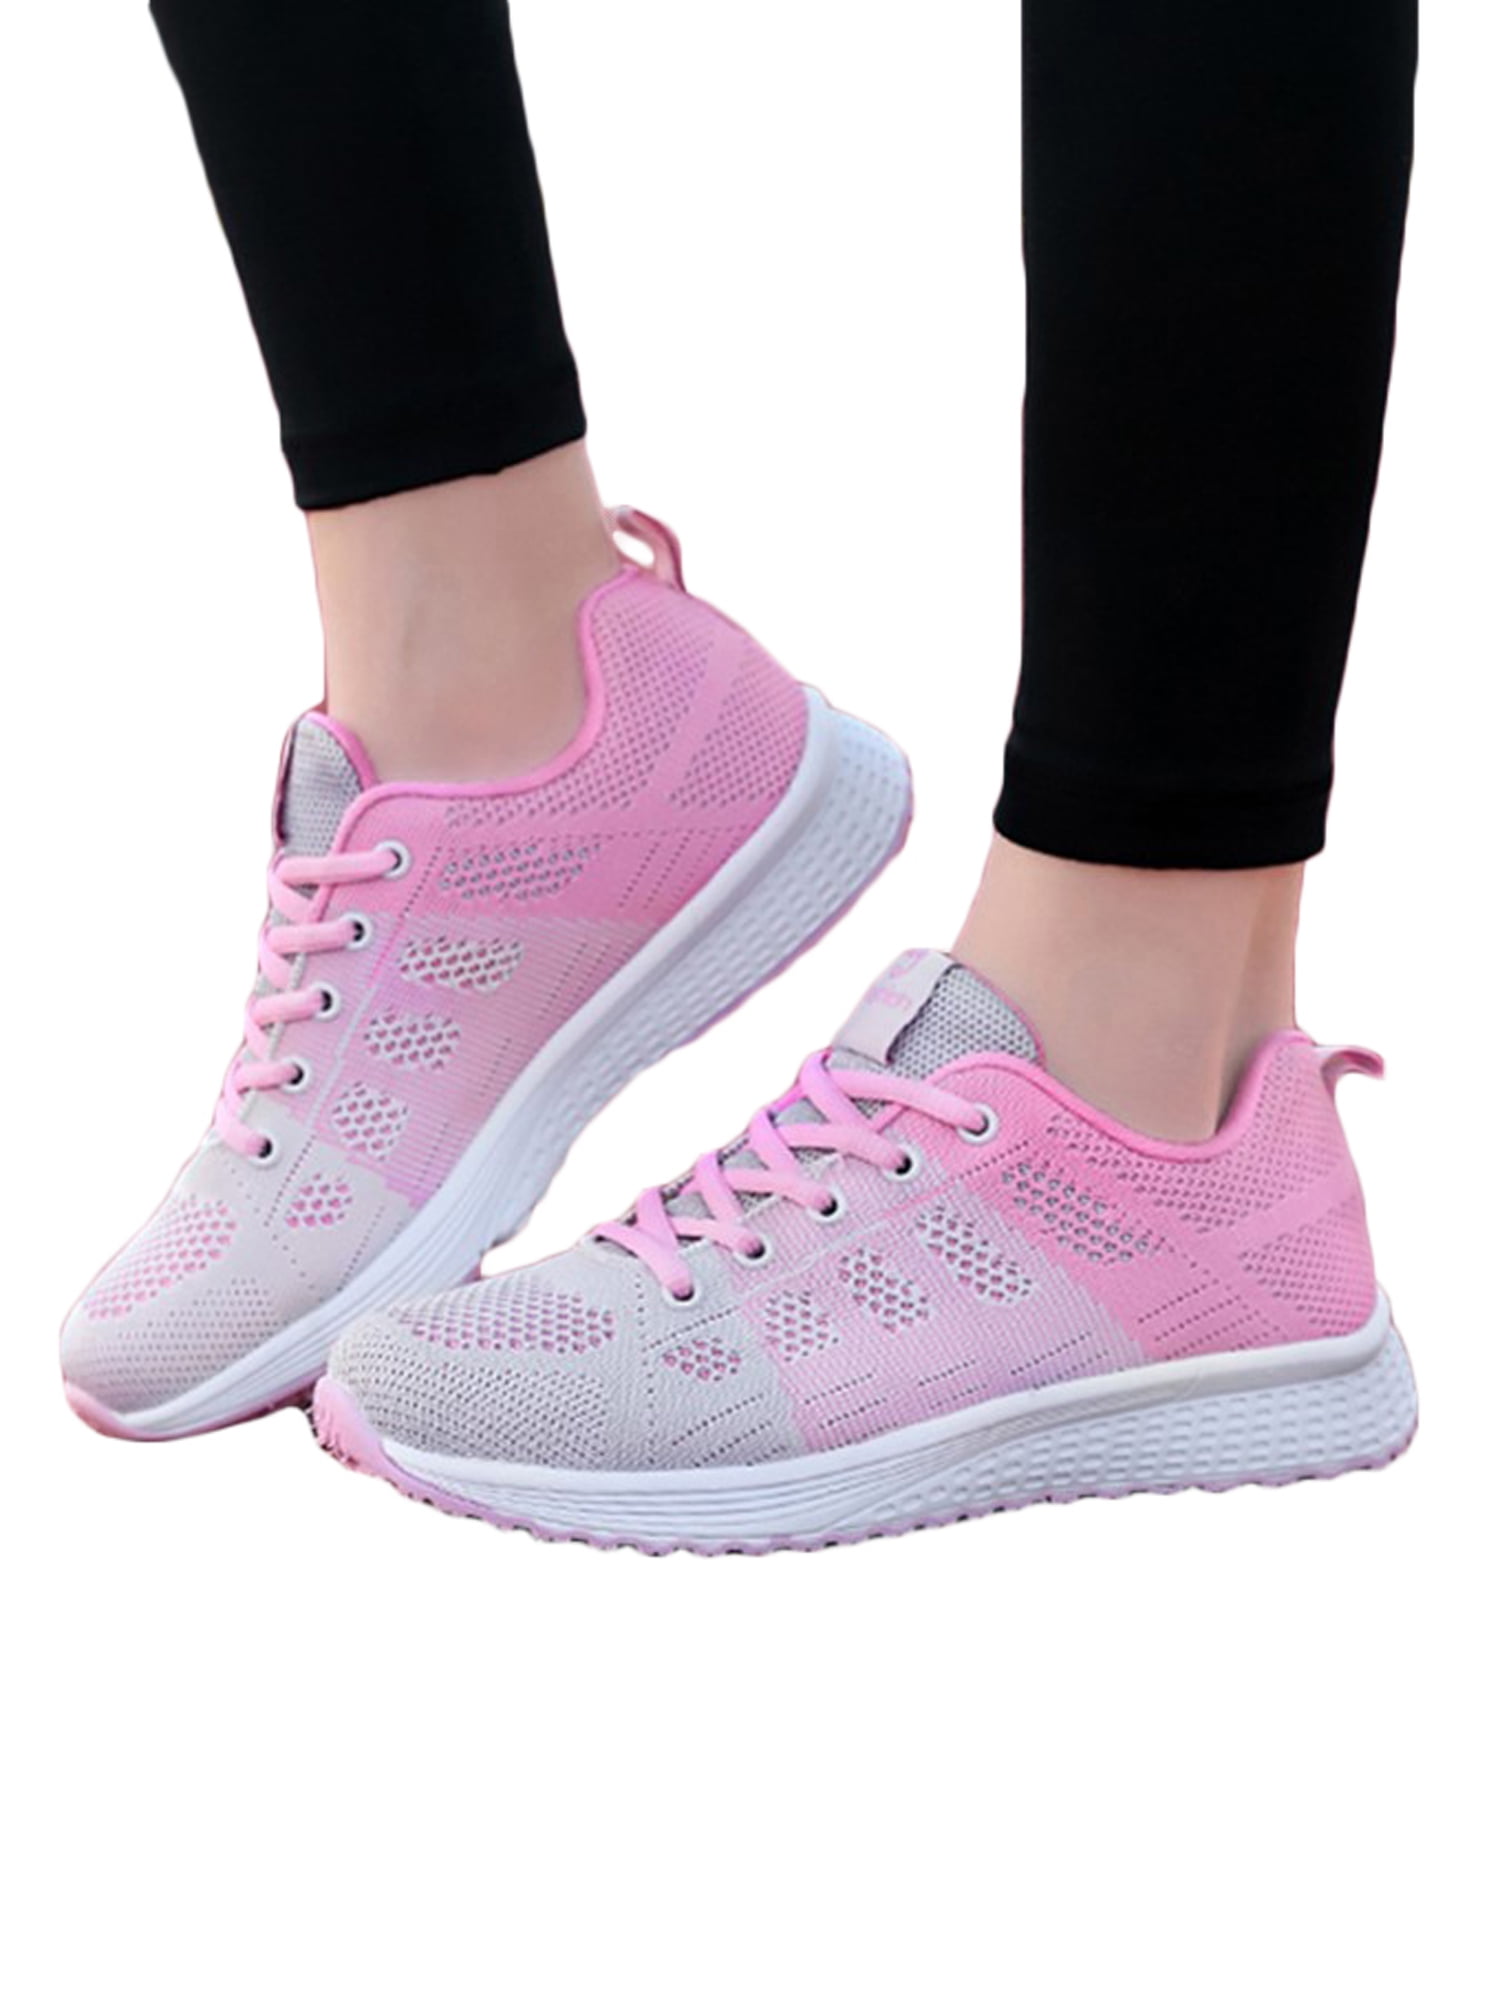 Details about   Women Mesh Breathable Sport Gym Running Trainer Athletic Sneakers Casual Shoes